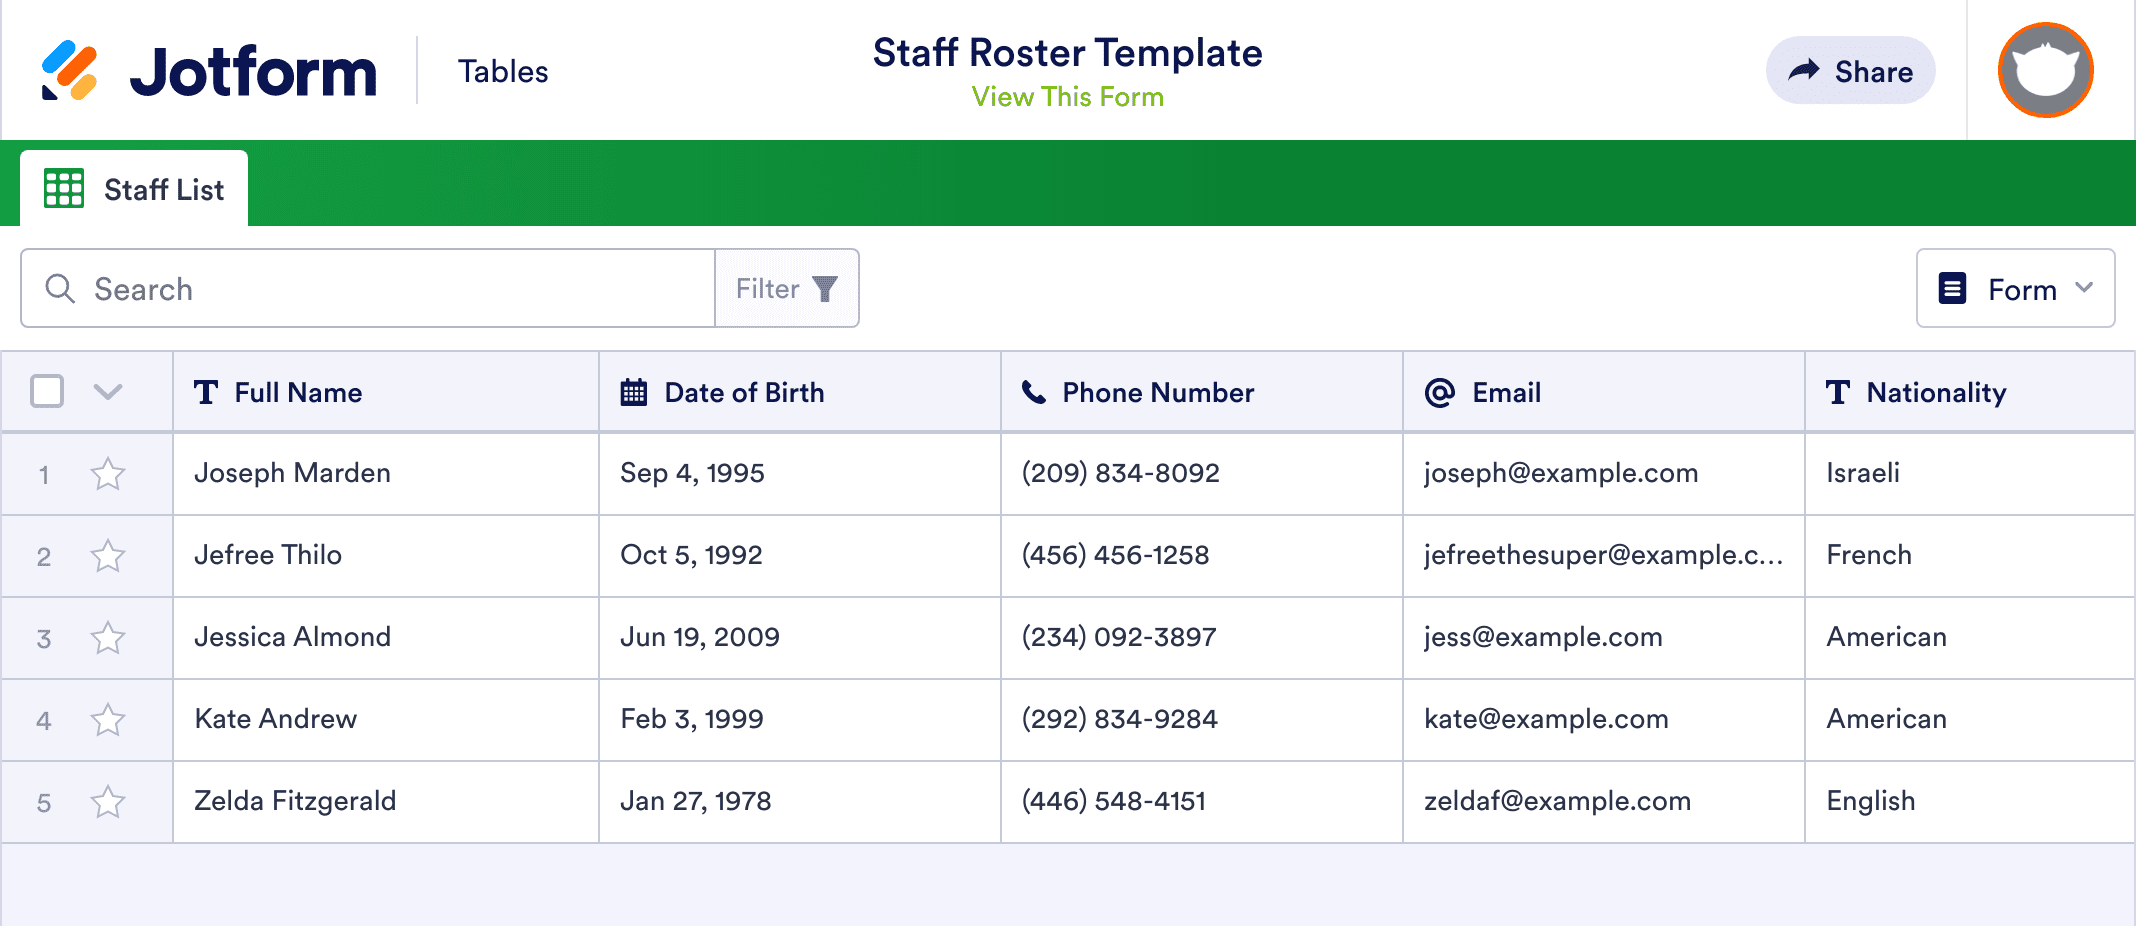 Staff Roster Template Jotform Tables | My XXX Hot Girl